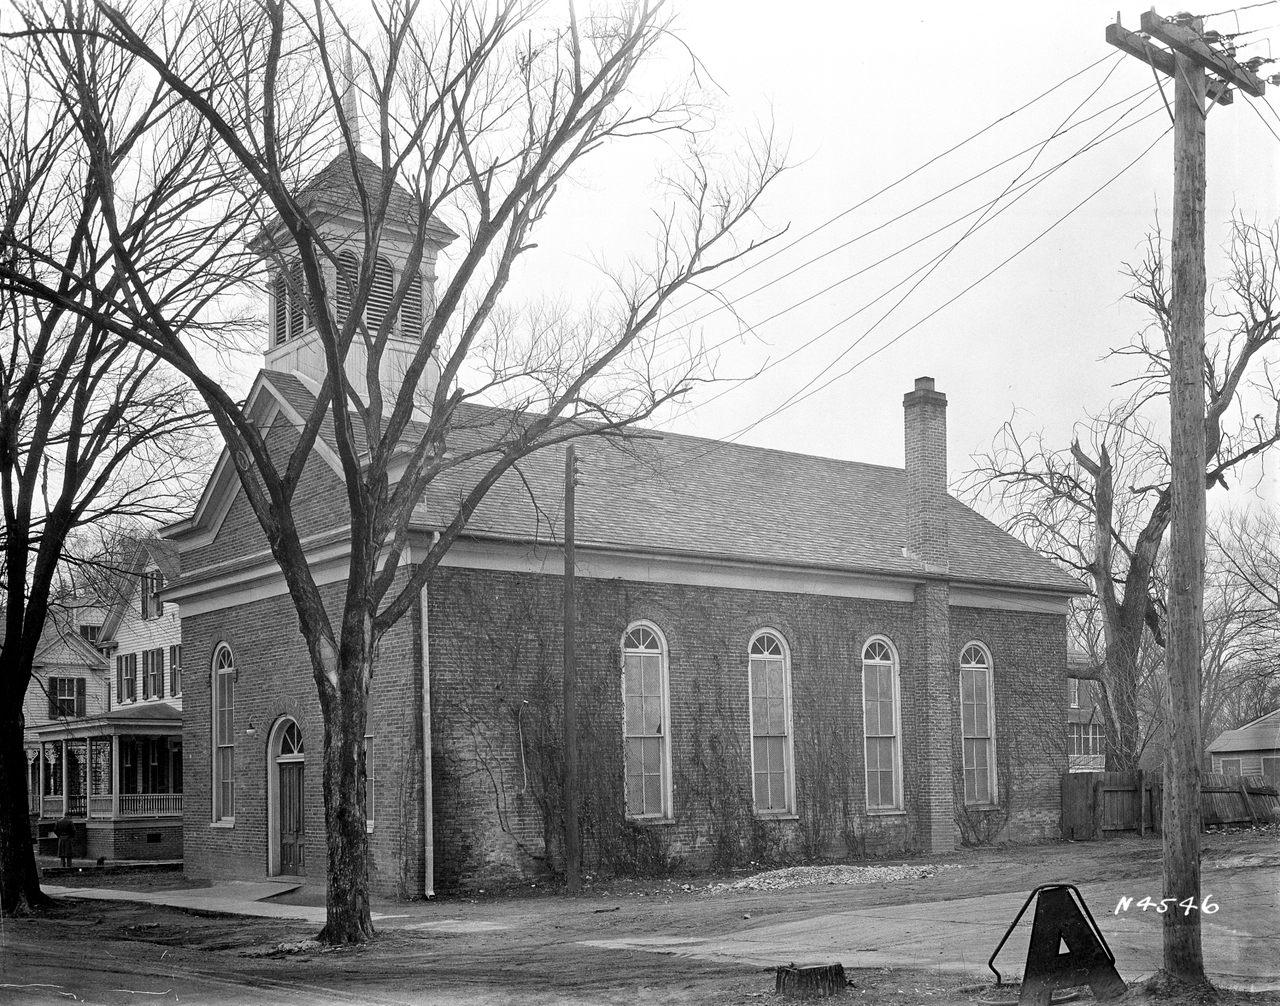 The First Baptist Church was torn down in 1957 and replaced by a parking lot.